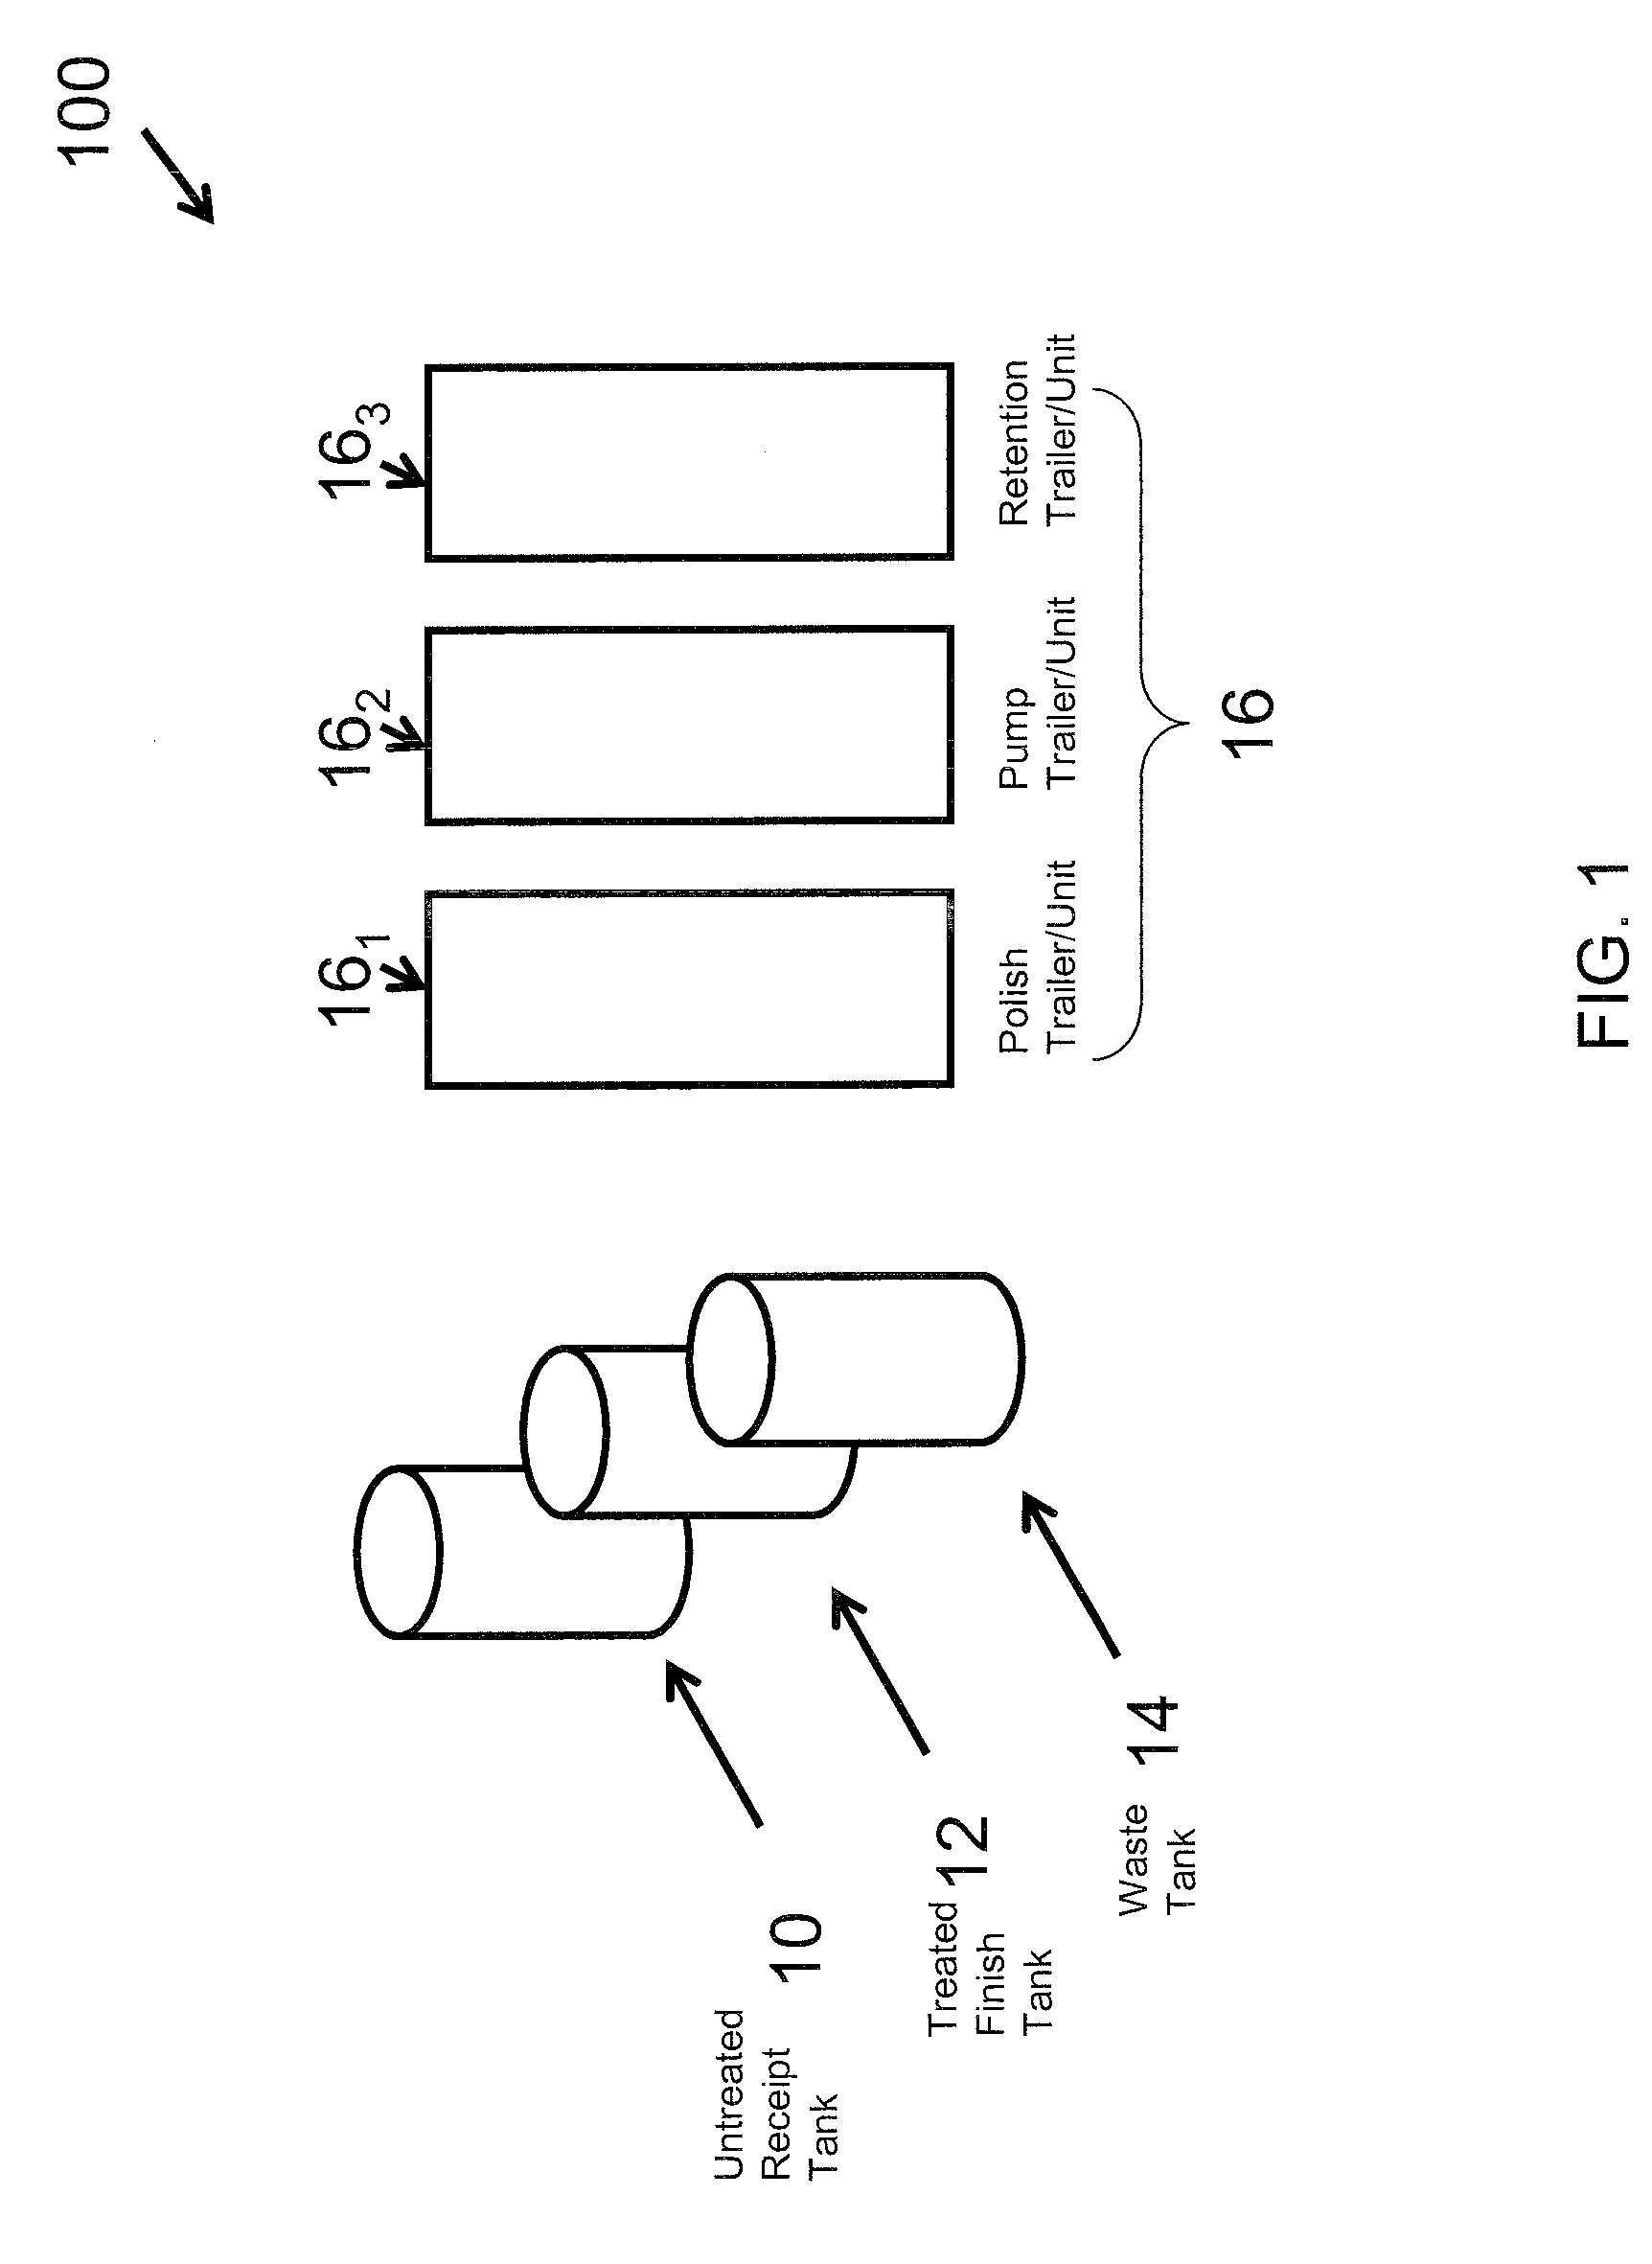 Recycling and treatment process for produced and used flowback fracturing water